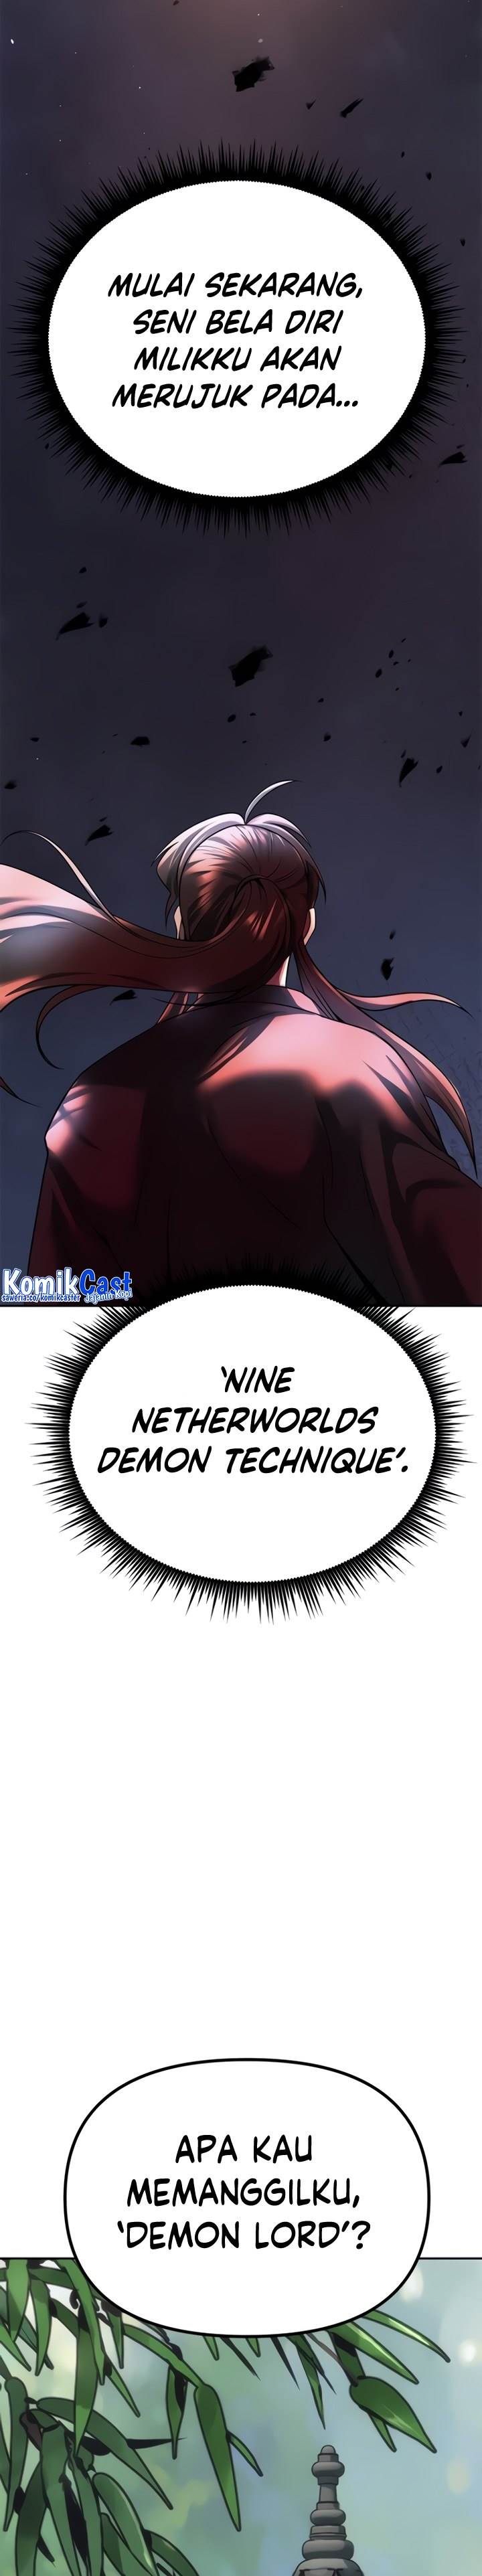 Chronicles of the Demon Faction Chapter 51